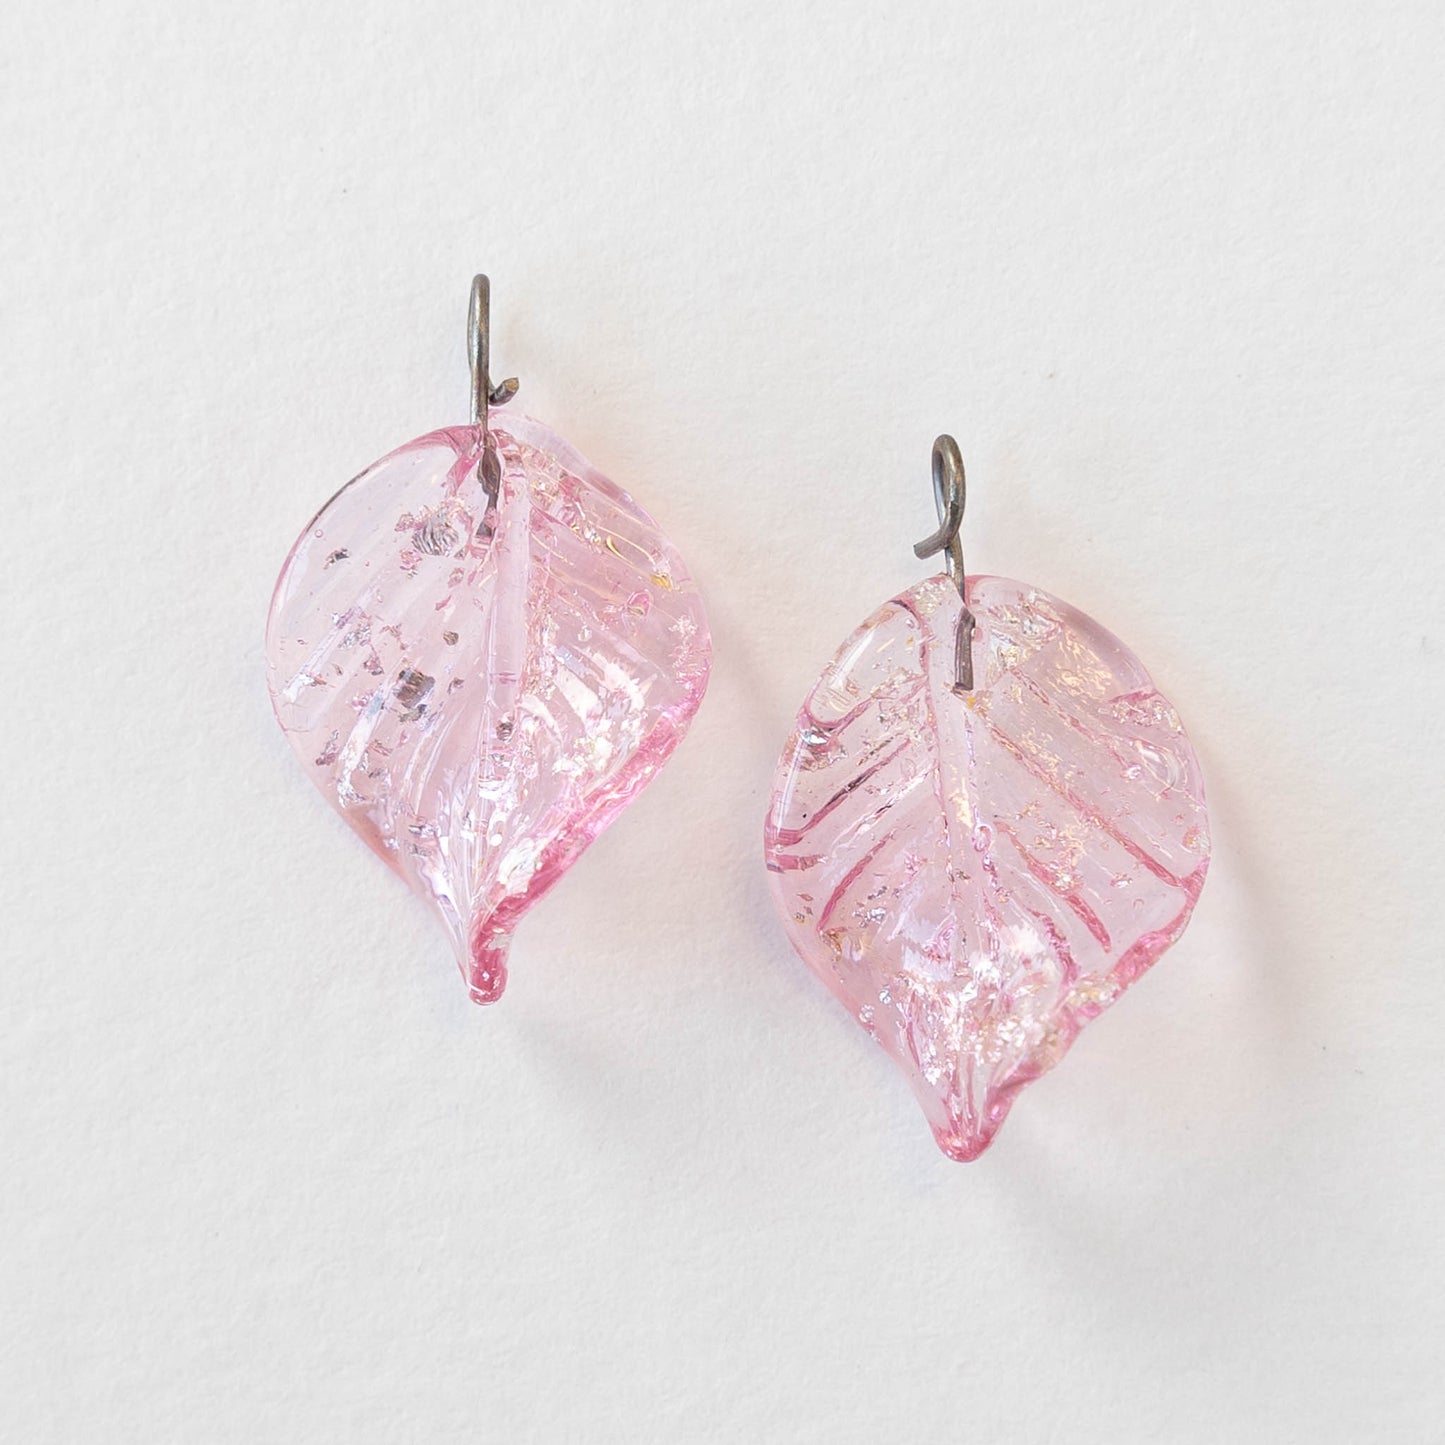 Handmade Glass Leaf Beads - Pink with Silver Dust - 2 leaves